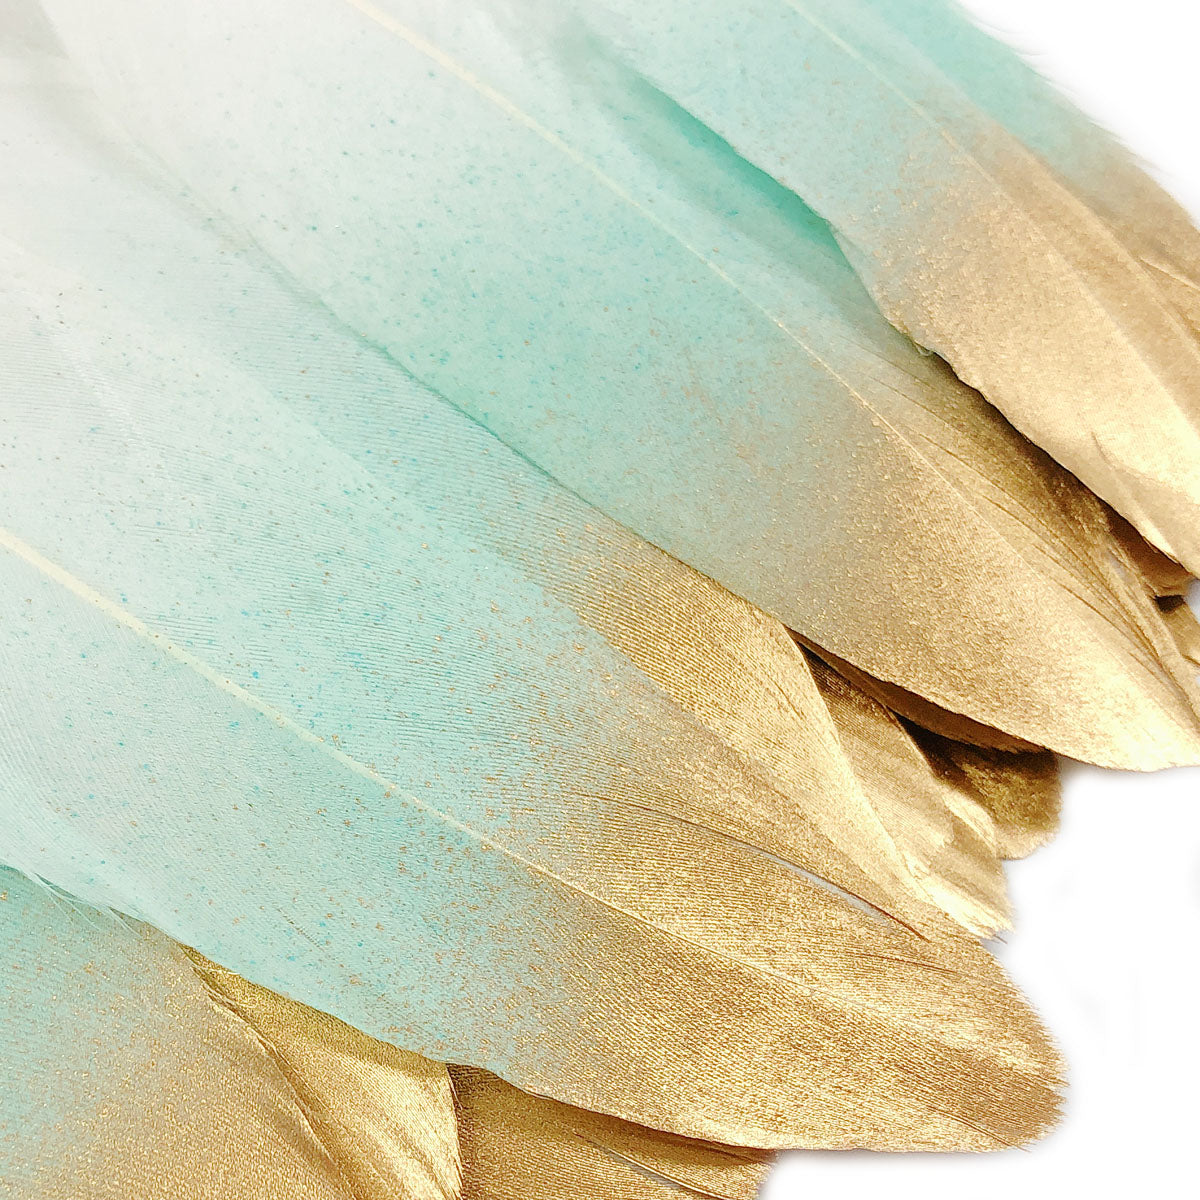 Wrapables Gold Dipped Feathers, Bohemian Decorations for Weddings, Parties, DIY Art Projects